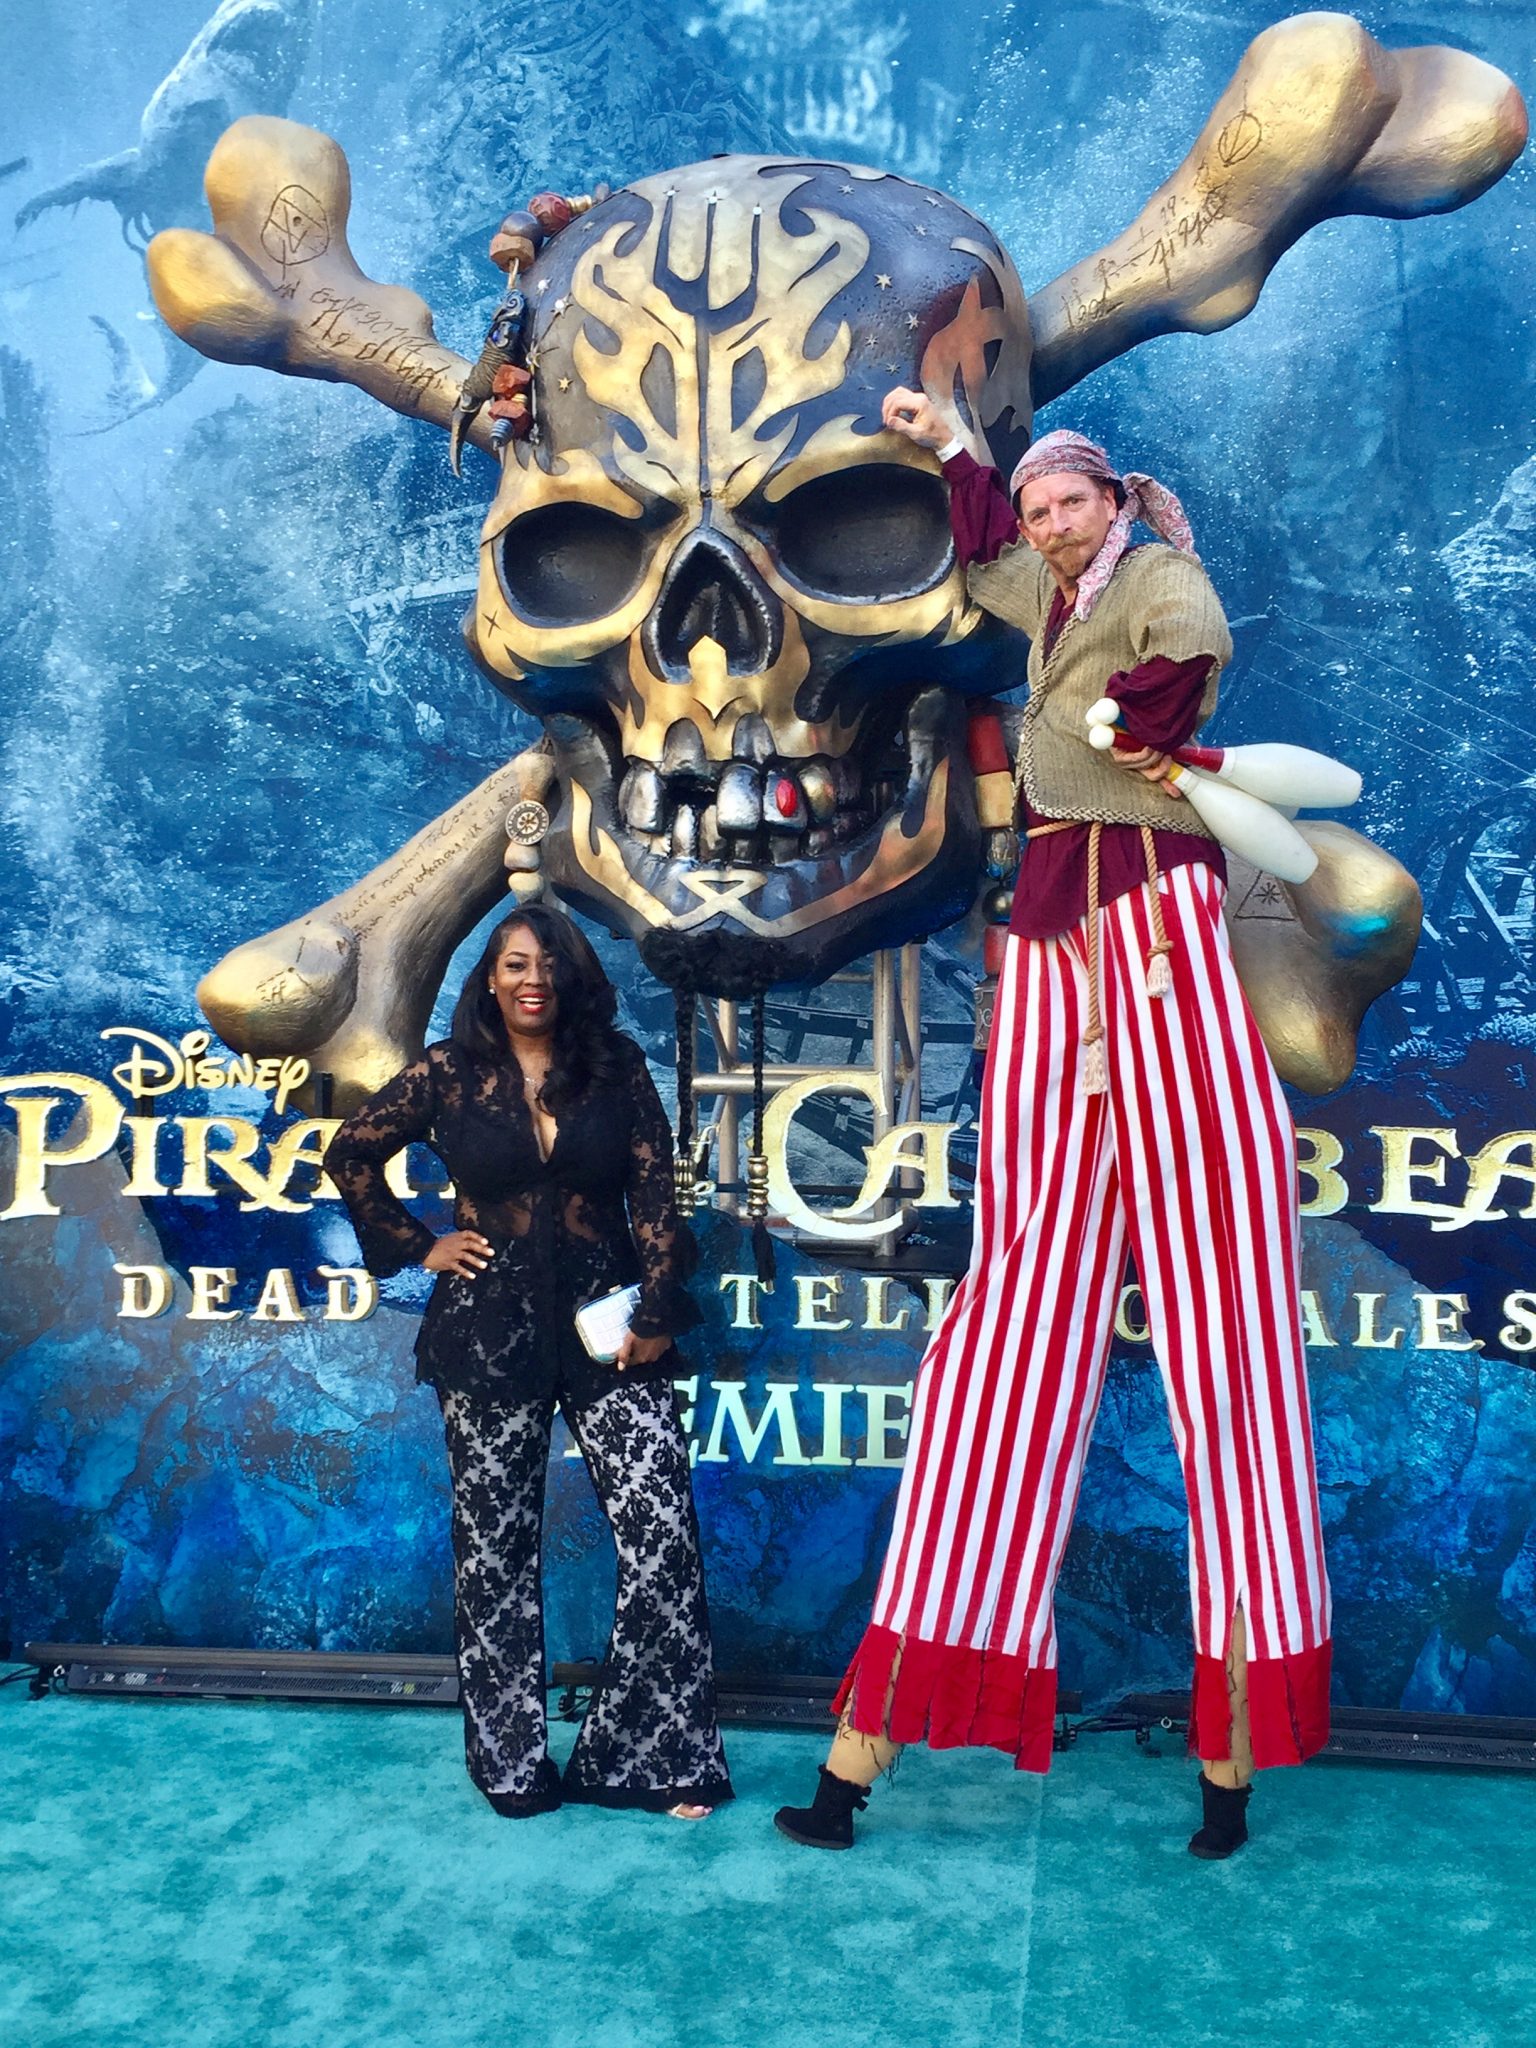 My Red Carpet Experience At Pirates Of The Caribbean Dead Men Tell No Tales Hollywood Premiere!